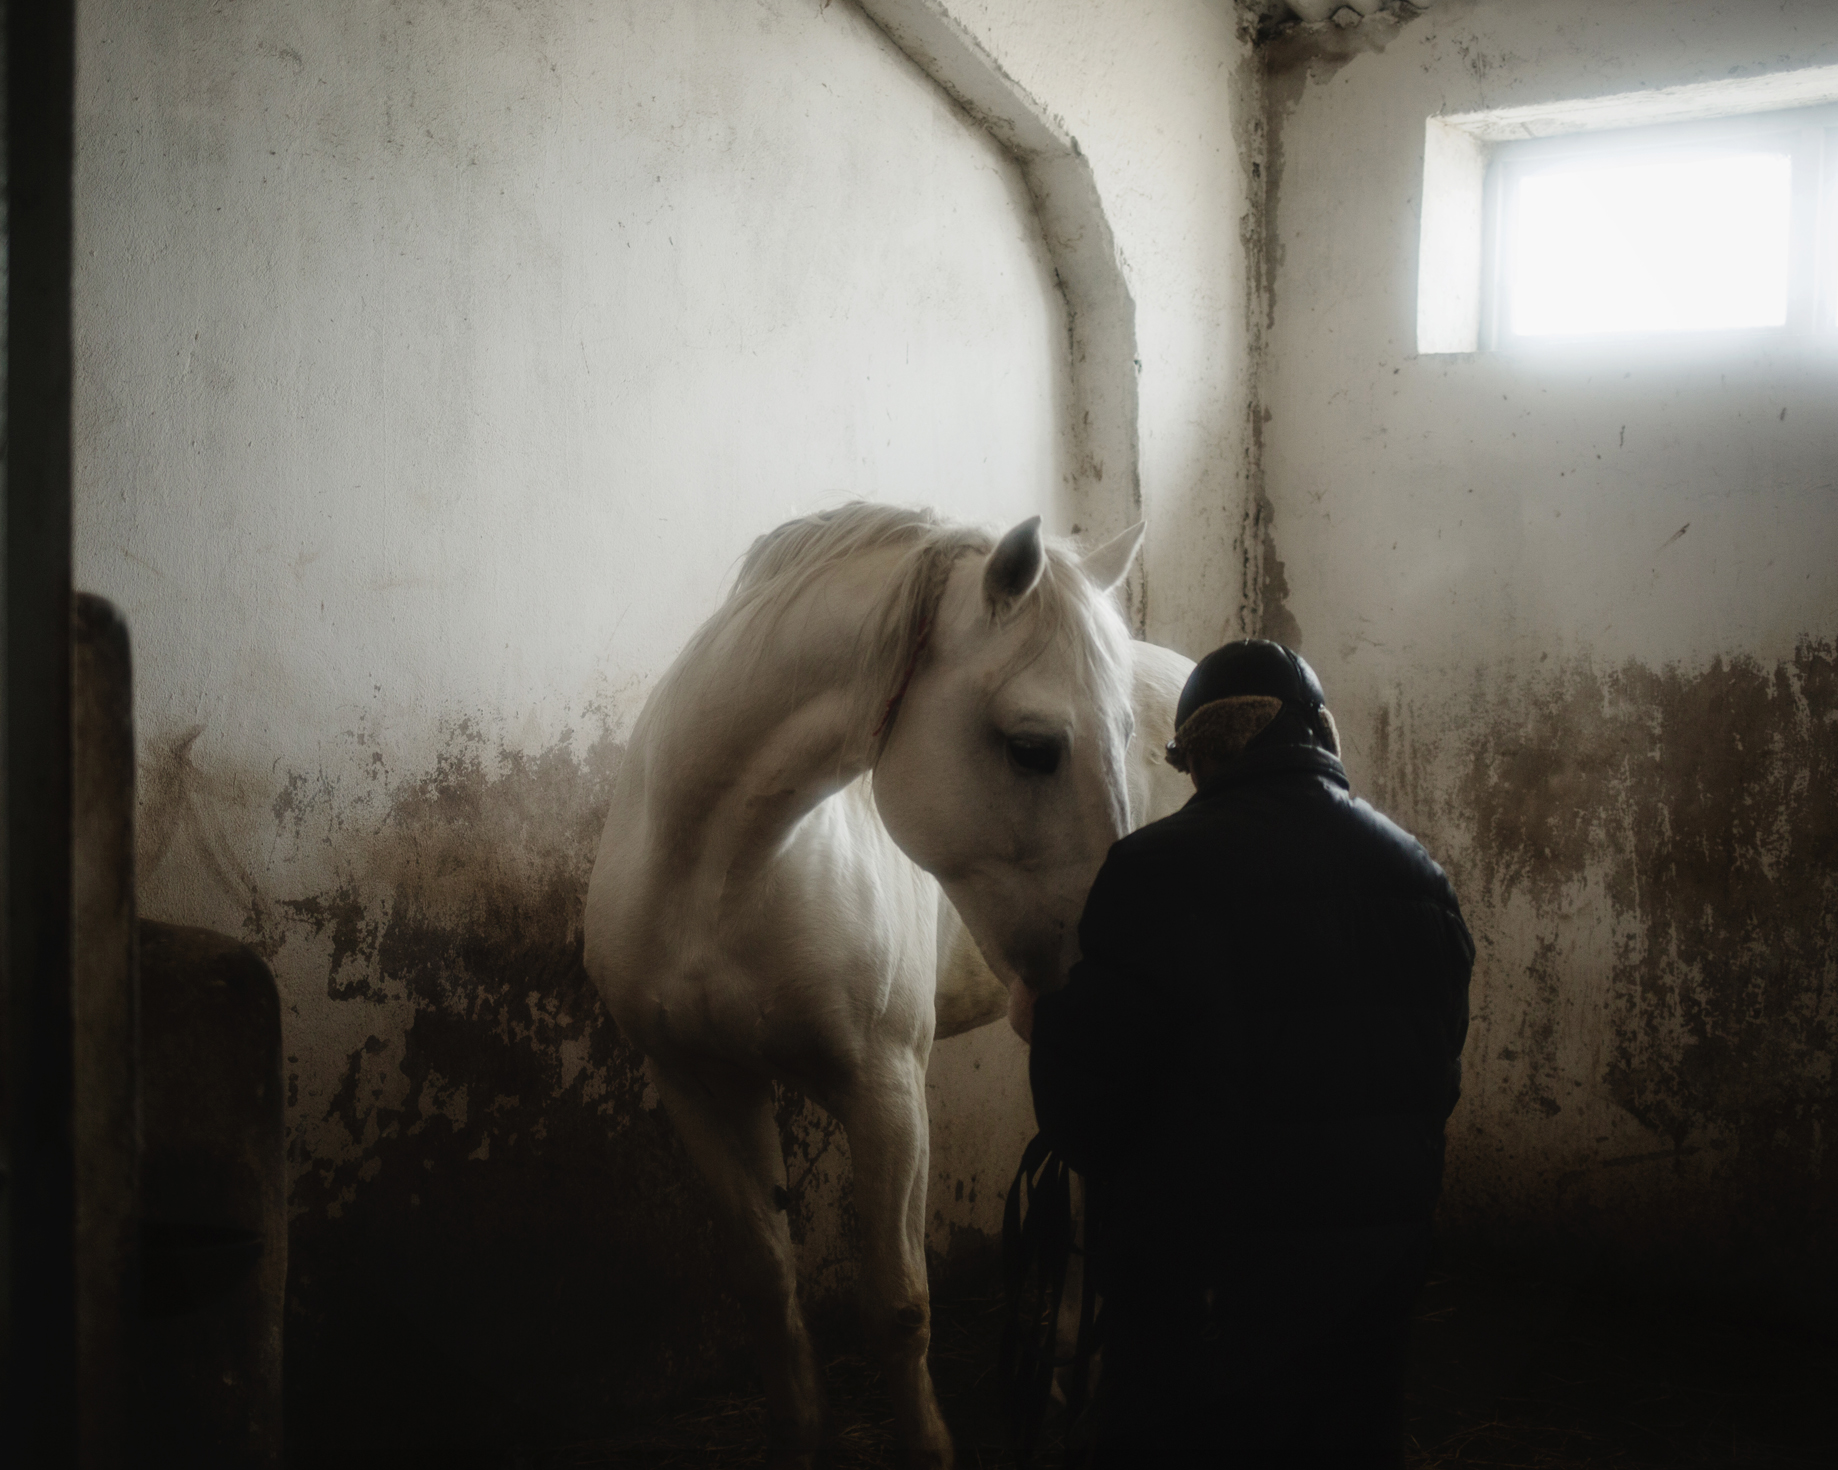  Ceadir-Lunga - In Konstantin Kelesh stud farm, a man takes care of one of the horses after its training 